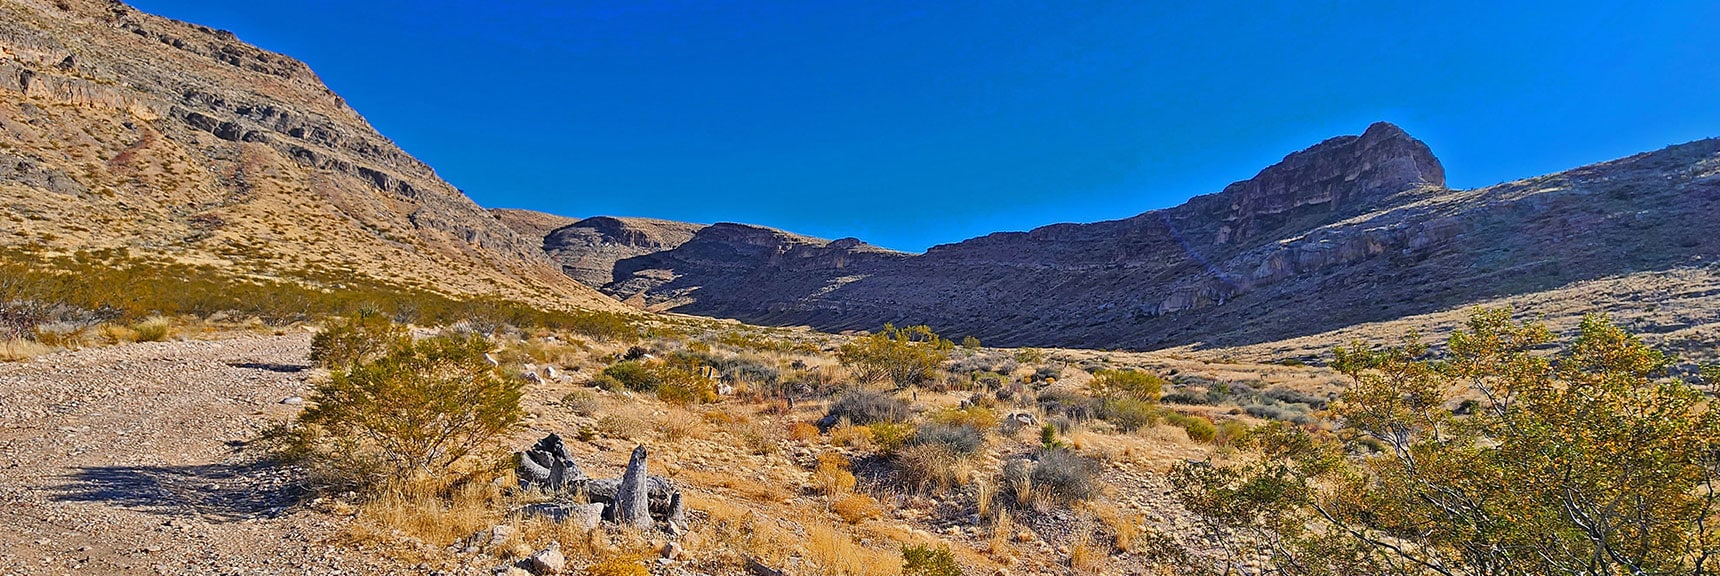 Entrance of Mule Spring Canyon. Trail at End of Road Leads to Mule Spring | Landmark Bluff Summit | Lovell Canyon, Nevada